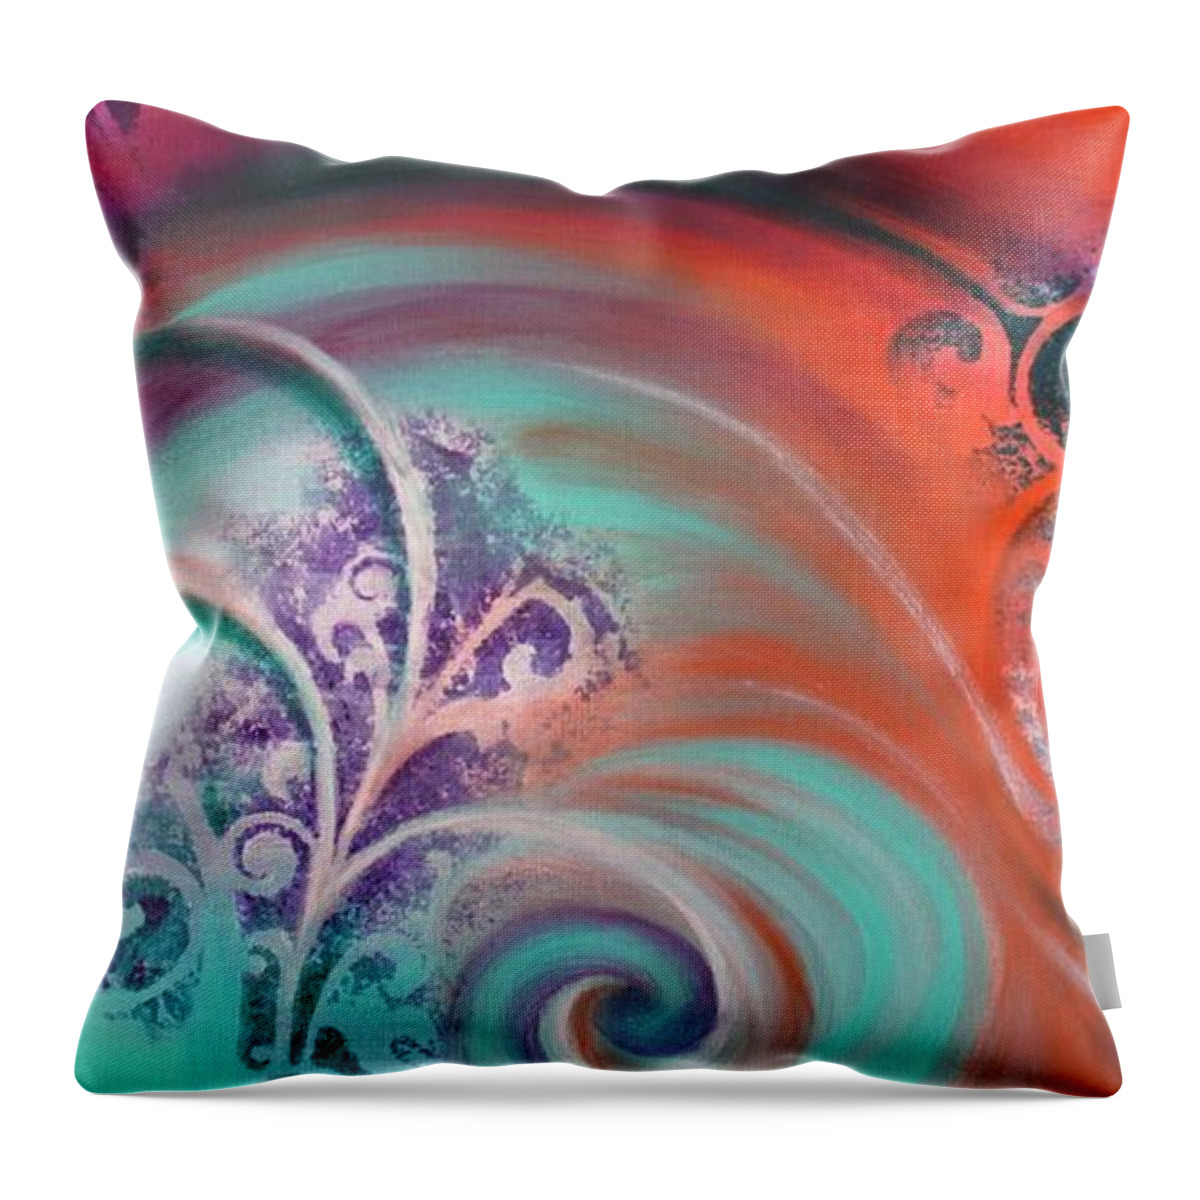 Abstract Prints Throw Pillow featuring the painting Oceania by Reina Cottier